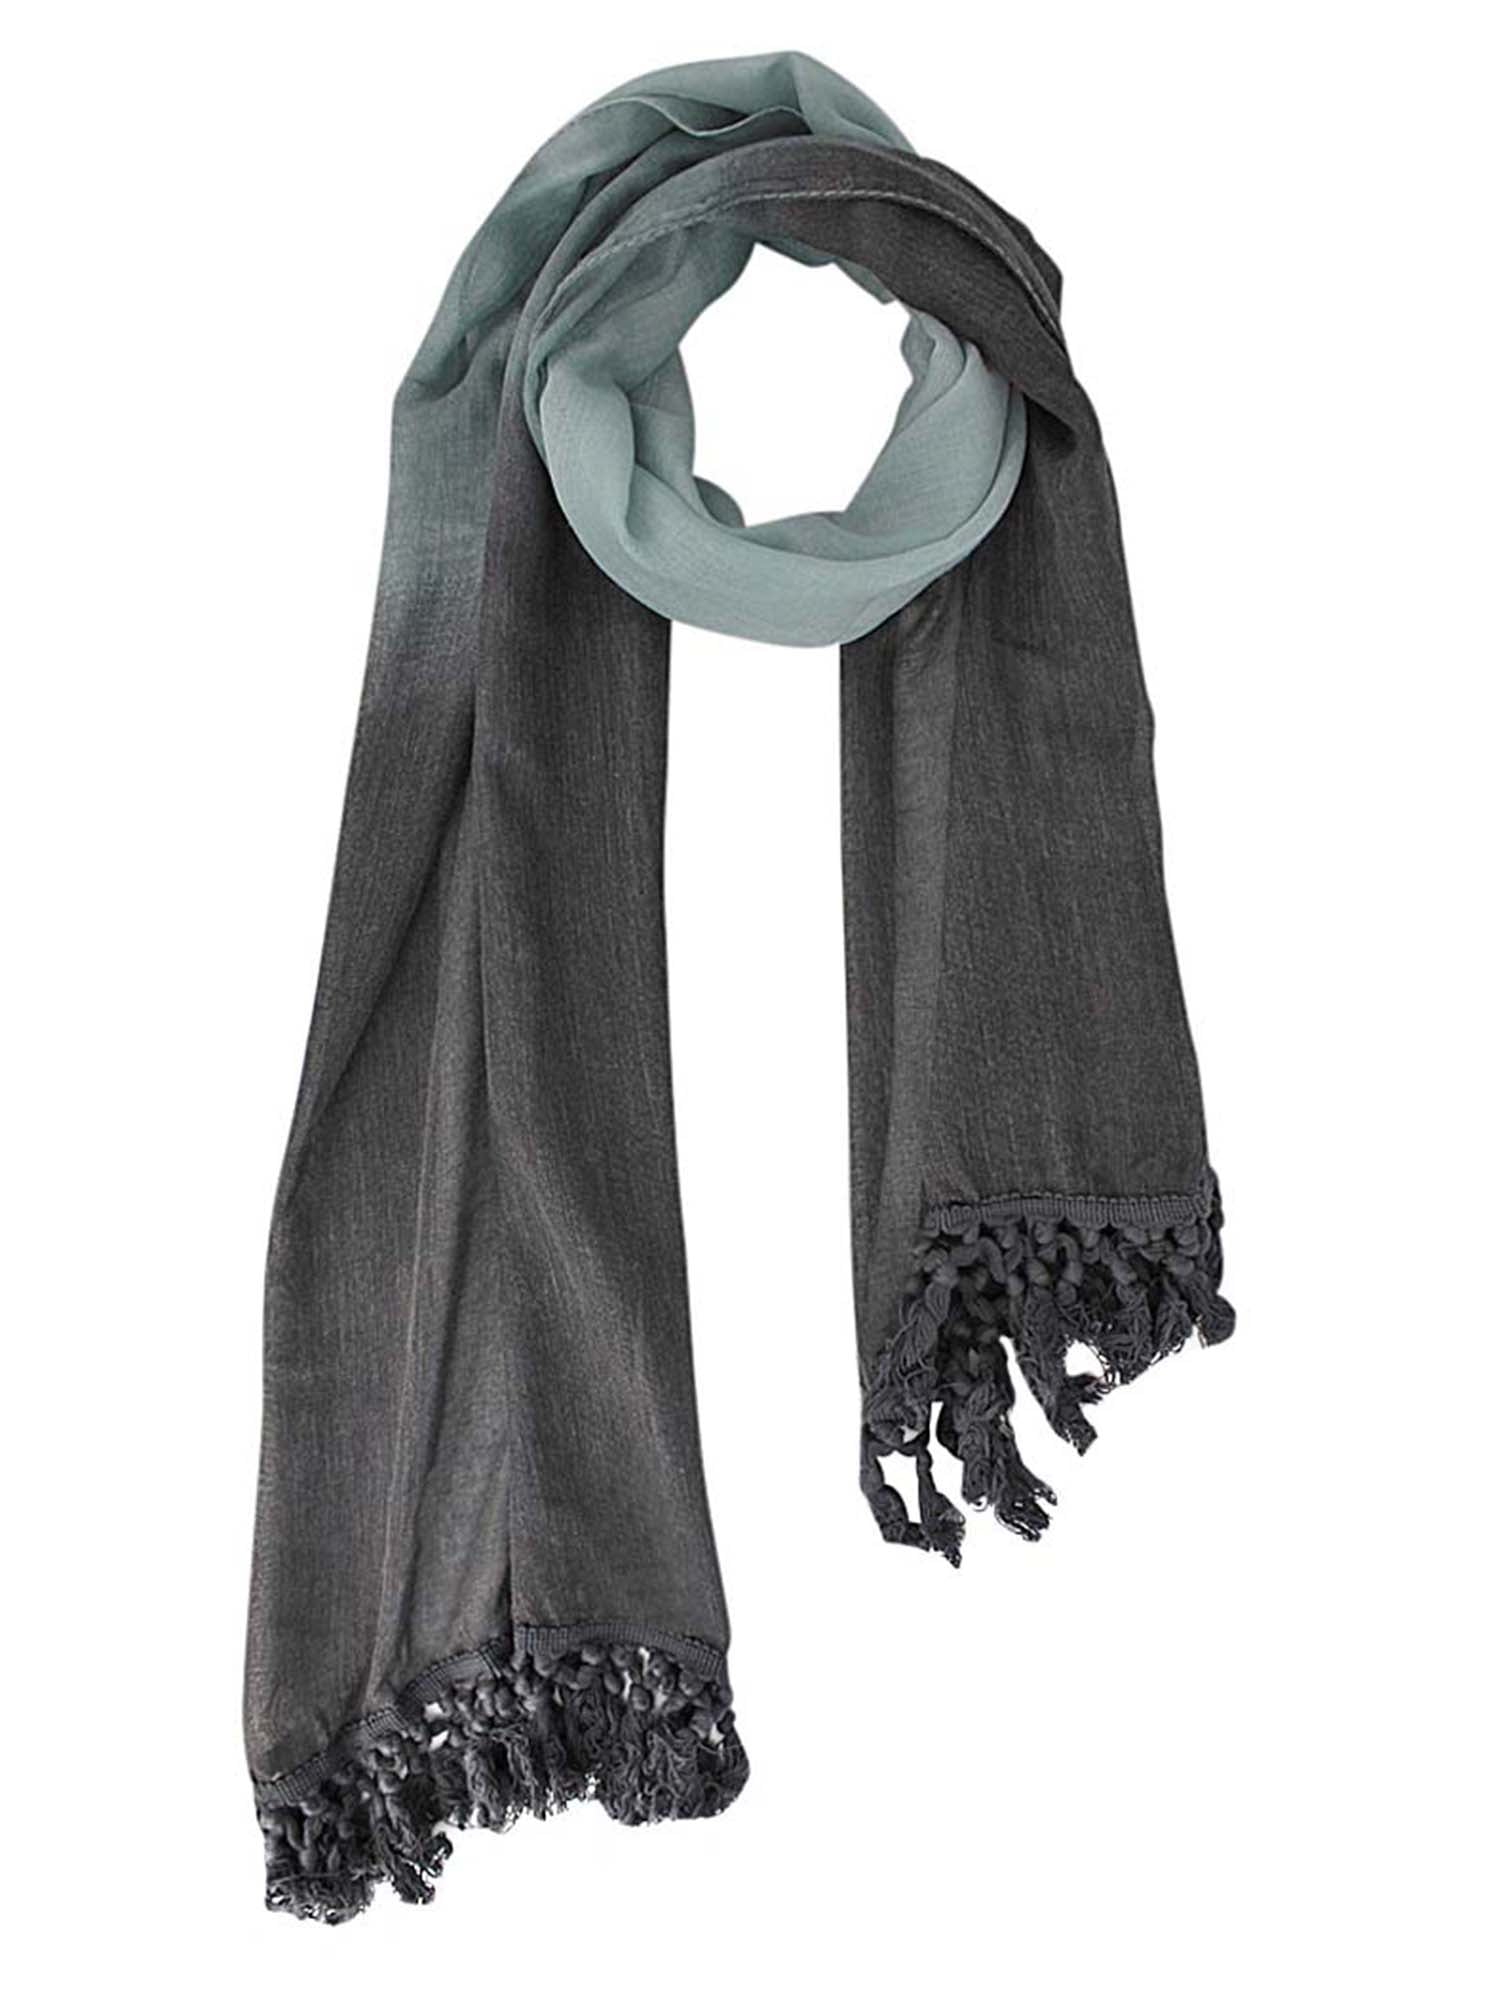 2 colors scarf,shawl spring double layer,fringed light weight  scarf.